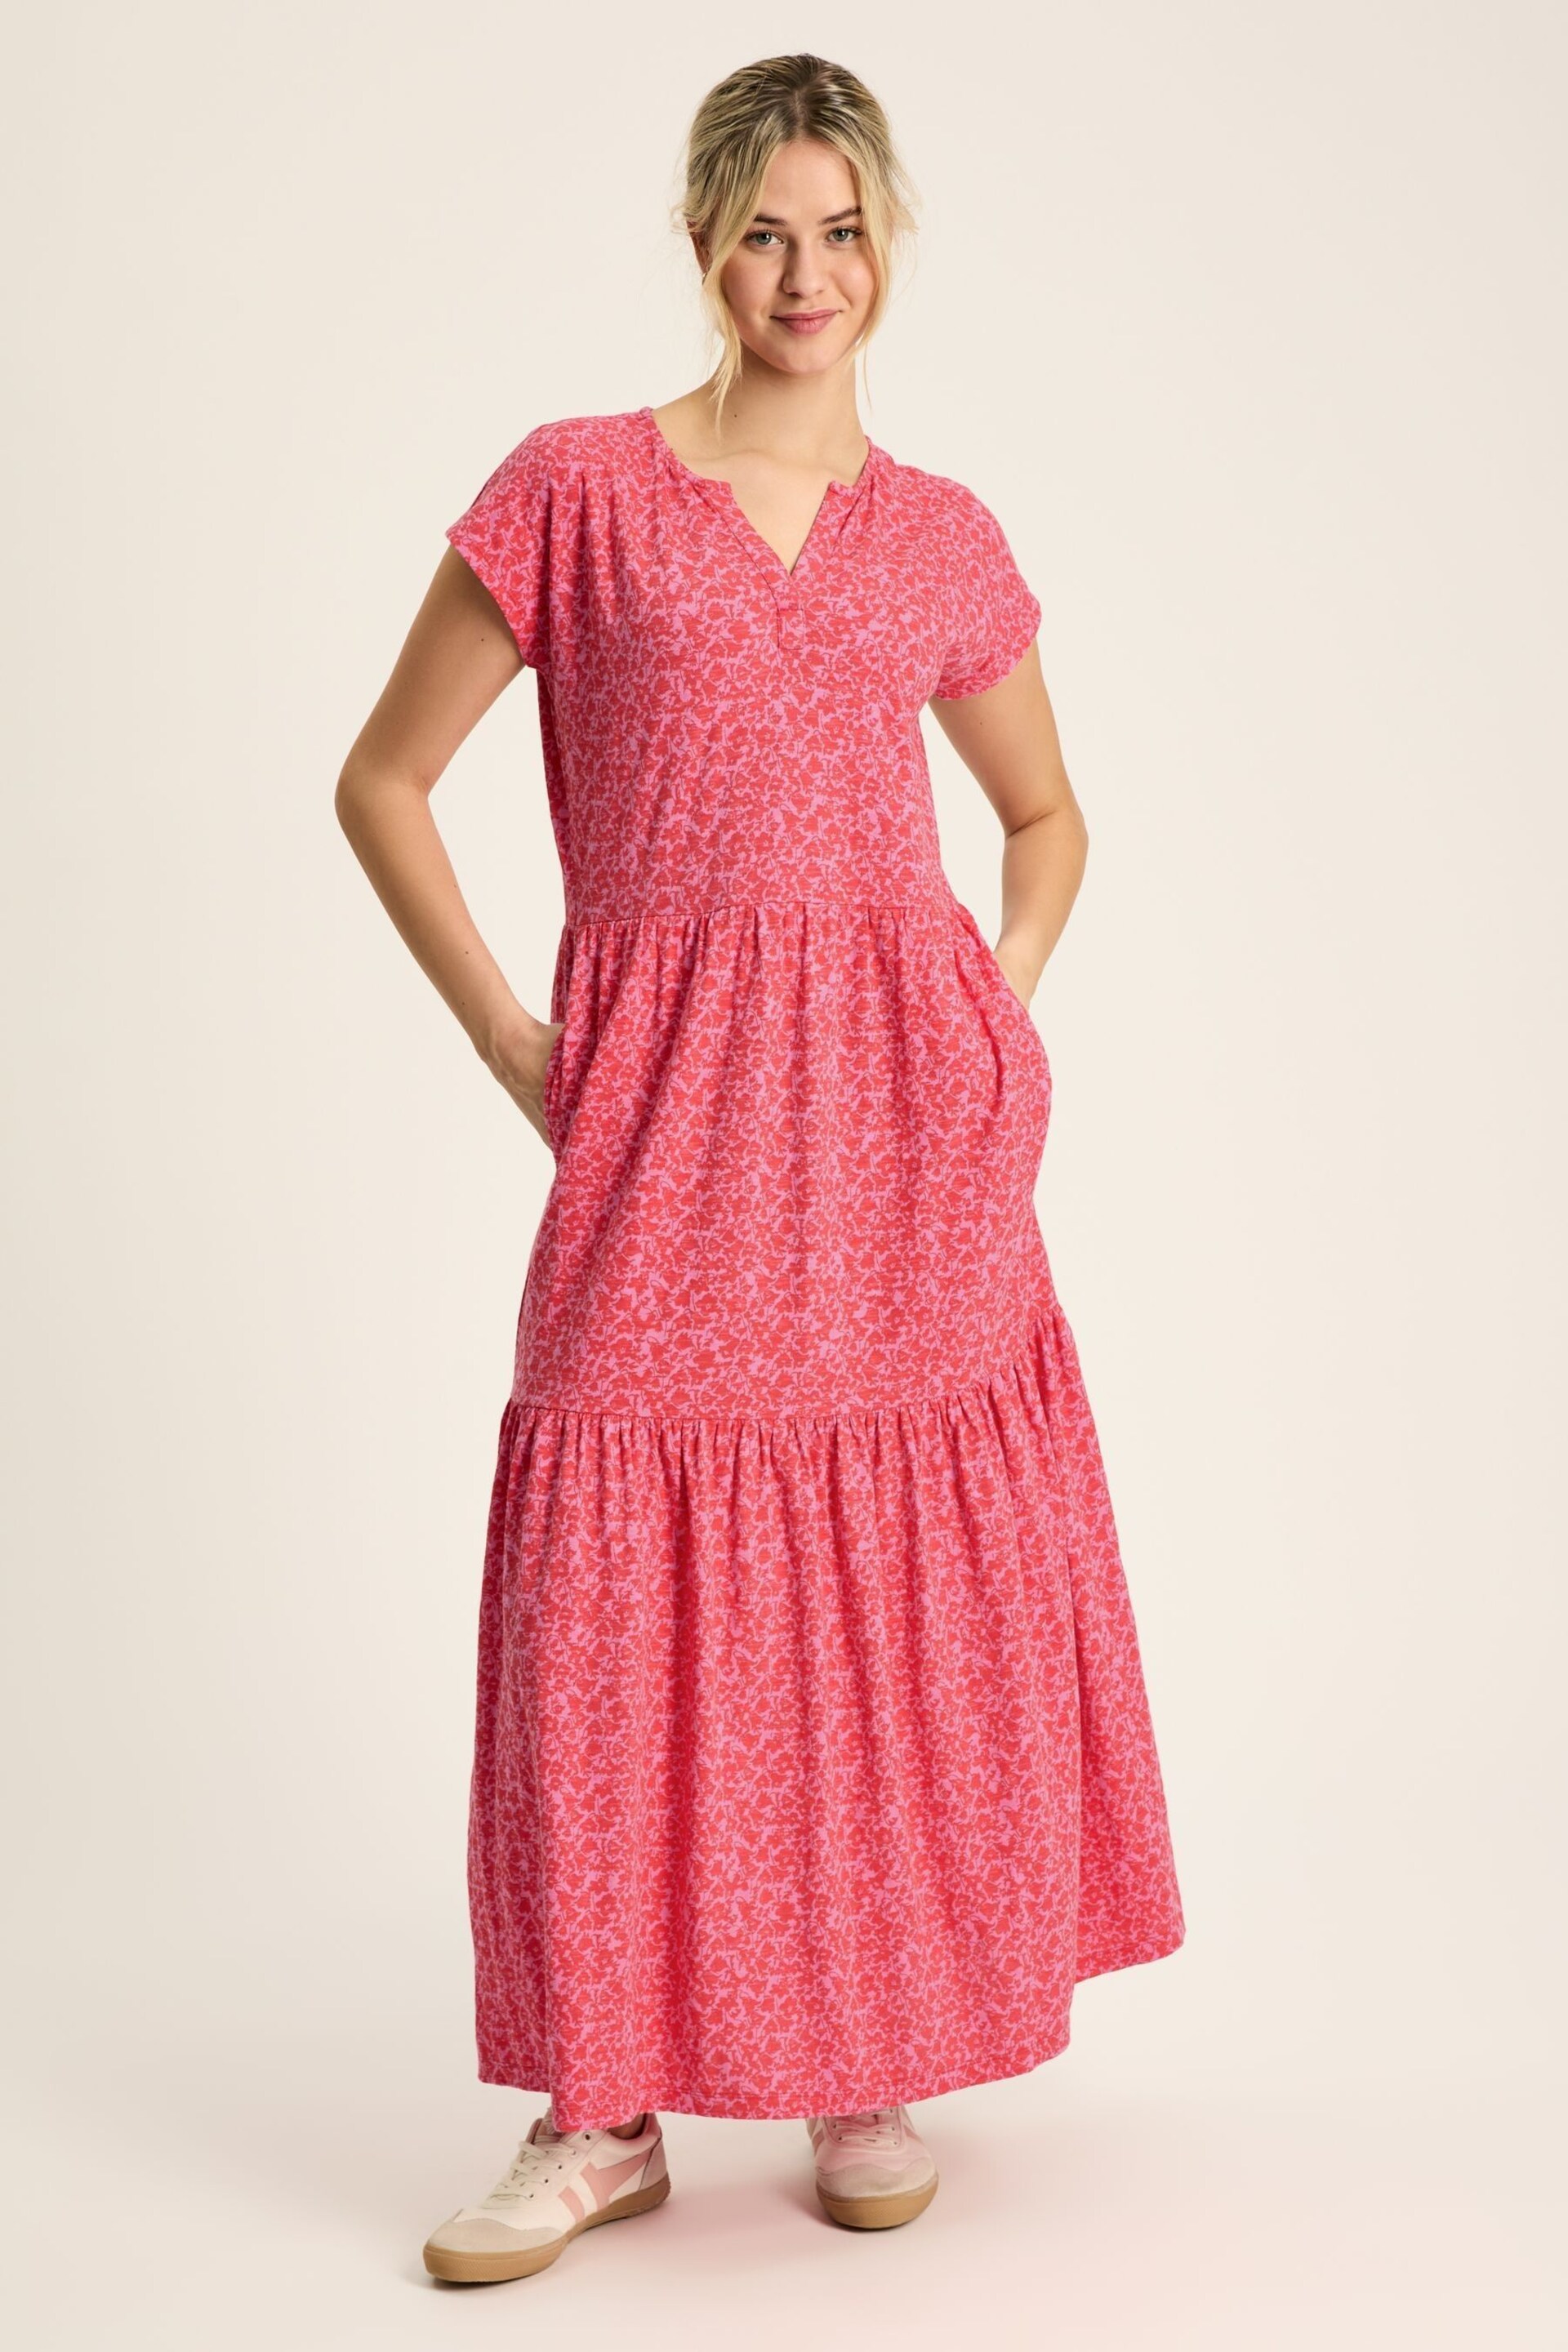 Joules Ariana Pink Jersey Tiered Dress - Image 1 of 7